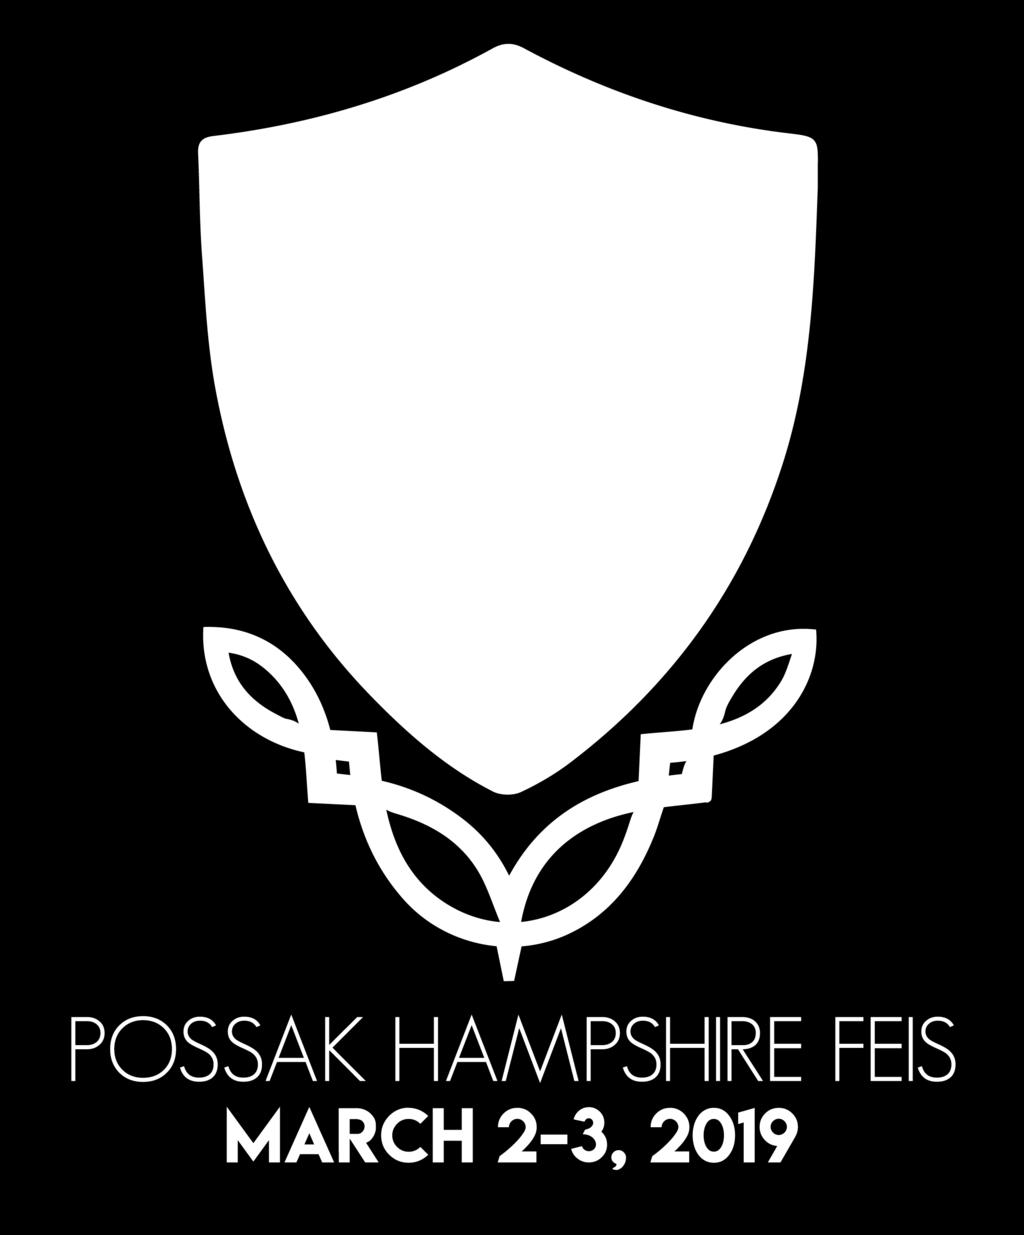 com Possak Hampshire Feis is registered with the North America Feis Commission, An Coimisiun